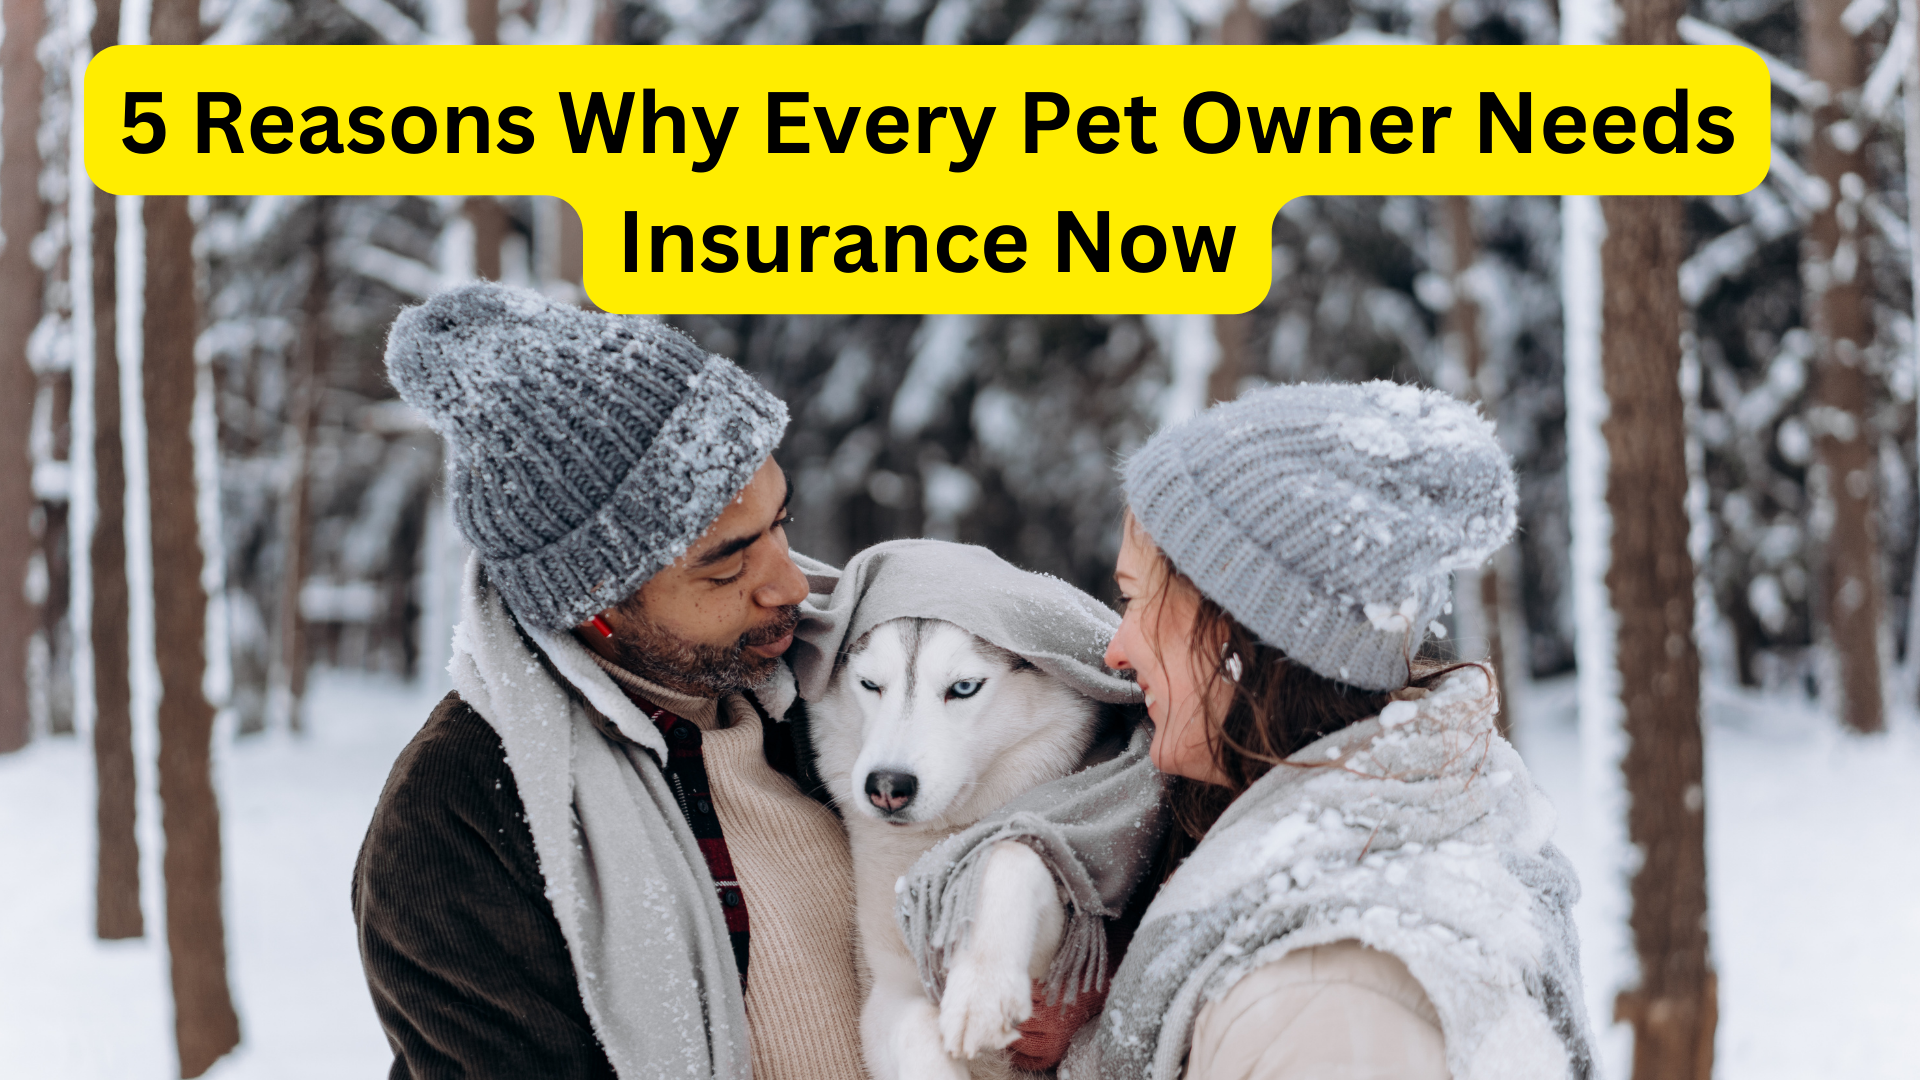 5 Reasons Why Every Pet Owner Needs Insurance Now